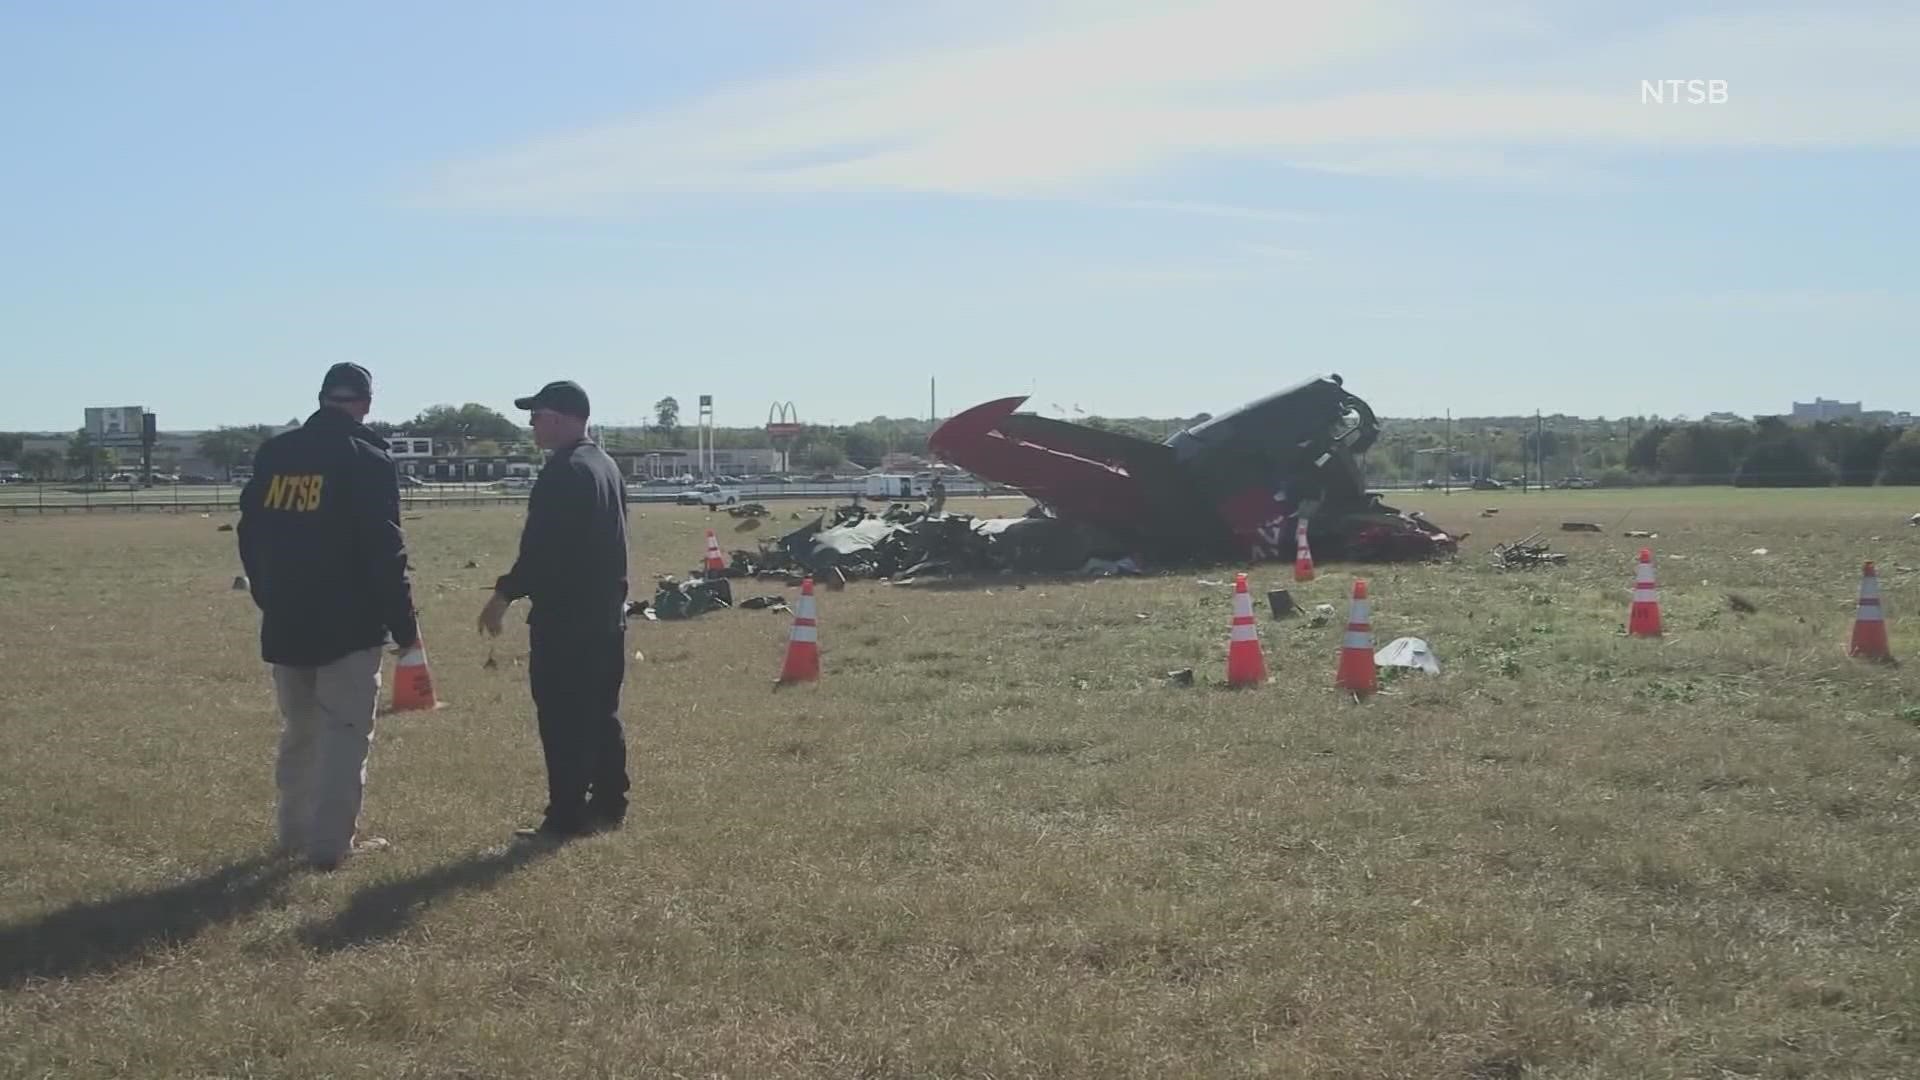 The National Transportation Safety Board released its preliminary report on the mid-air crash that killed six people.